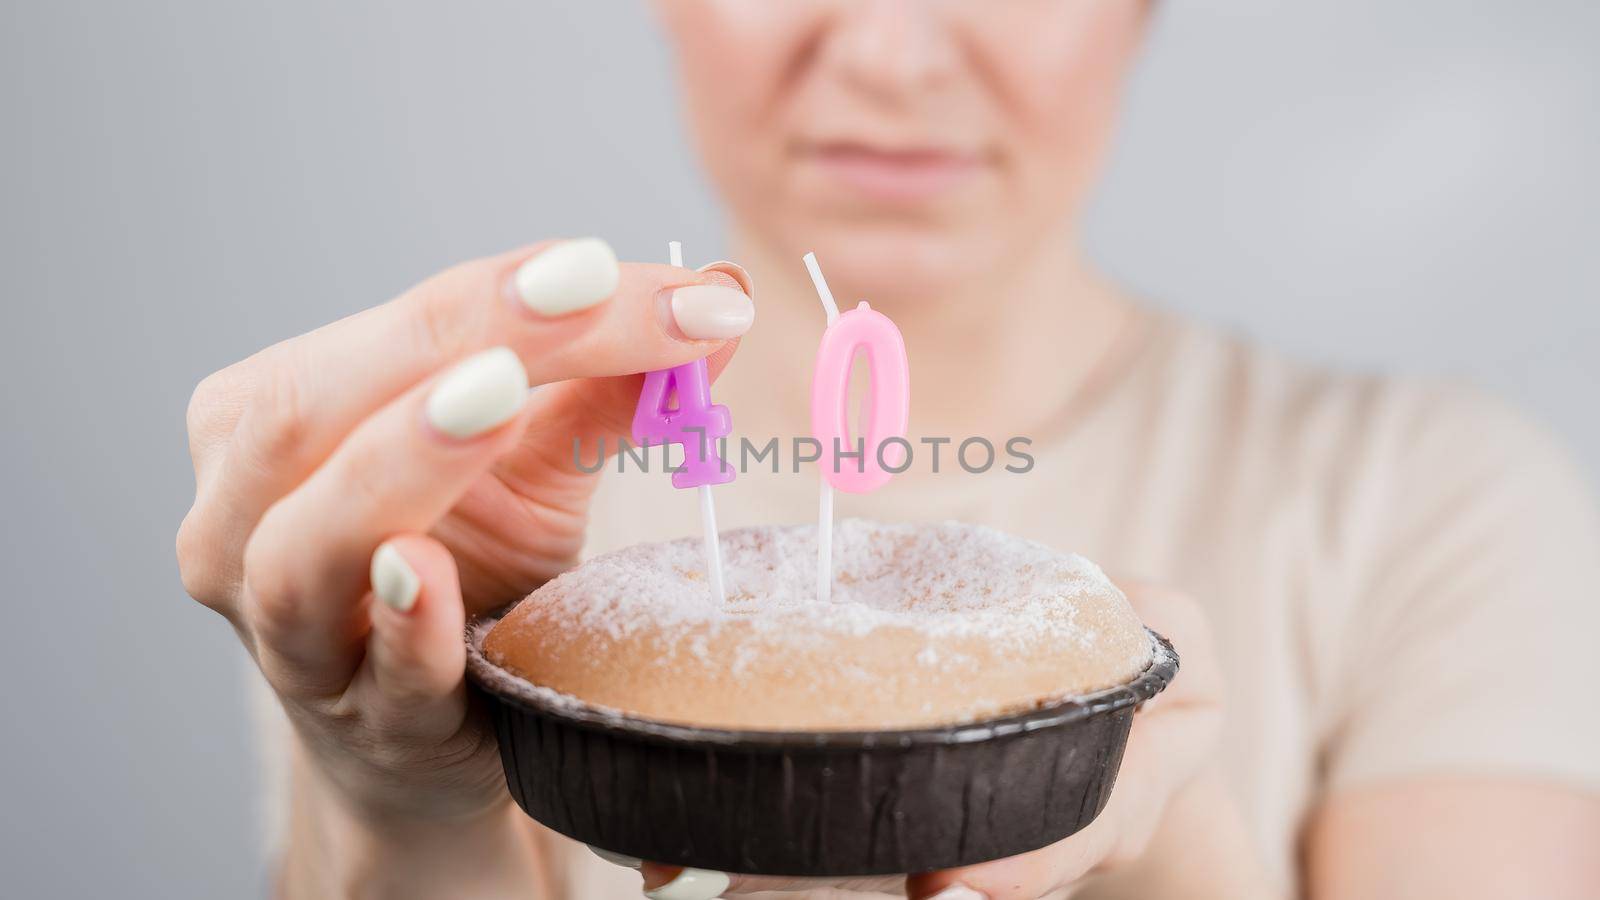 Unhappy woman holding a cake with candles for her 40th birthday. The girl cries about the loss of youth. by mrwed54